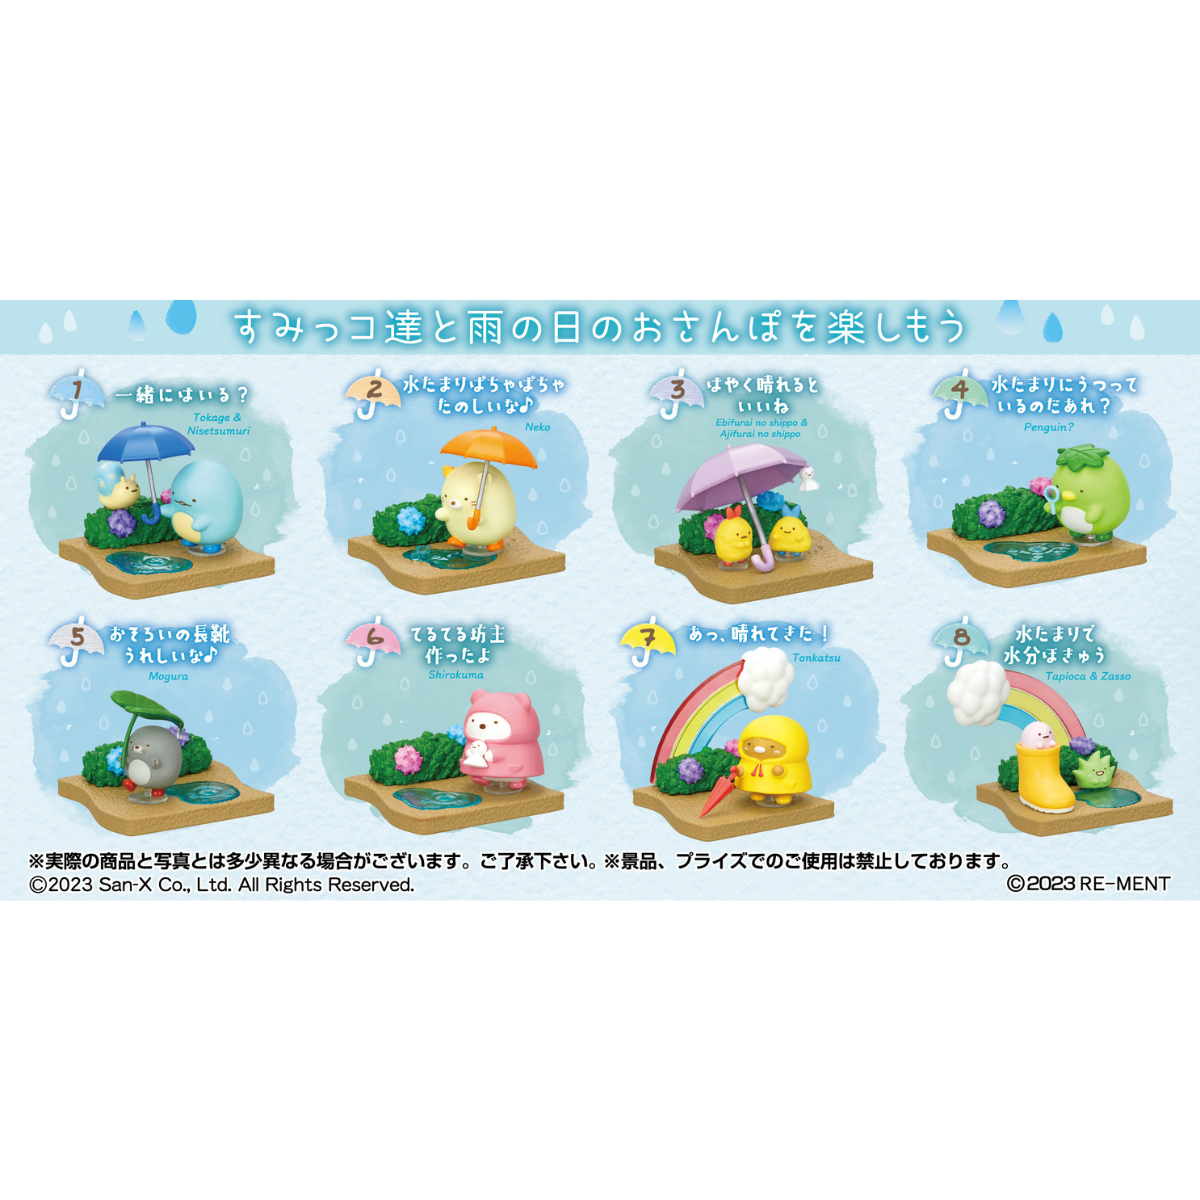 Re-Ment Sumikko Walking On A Rainy Day-Display Box (8pcs)-Re-Ment-Ace Cards & Collectibles